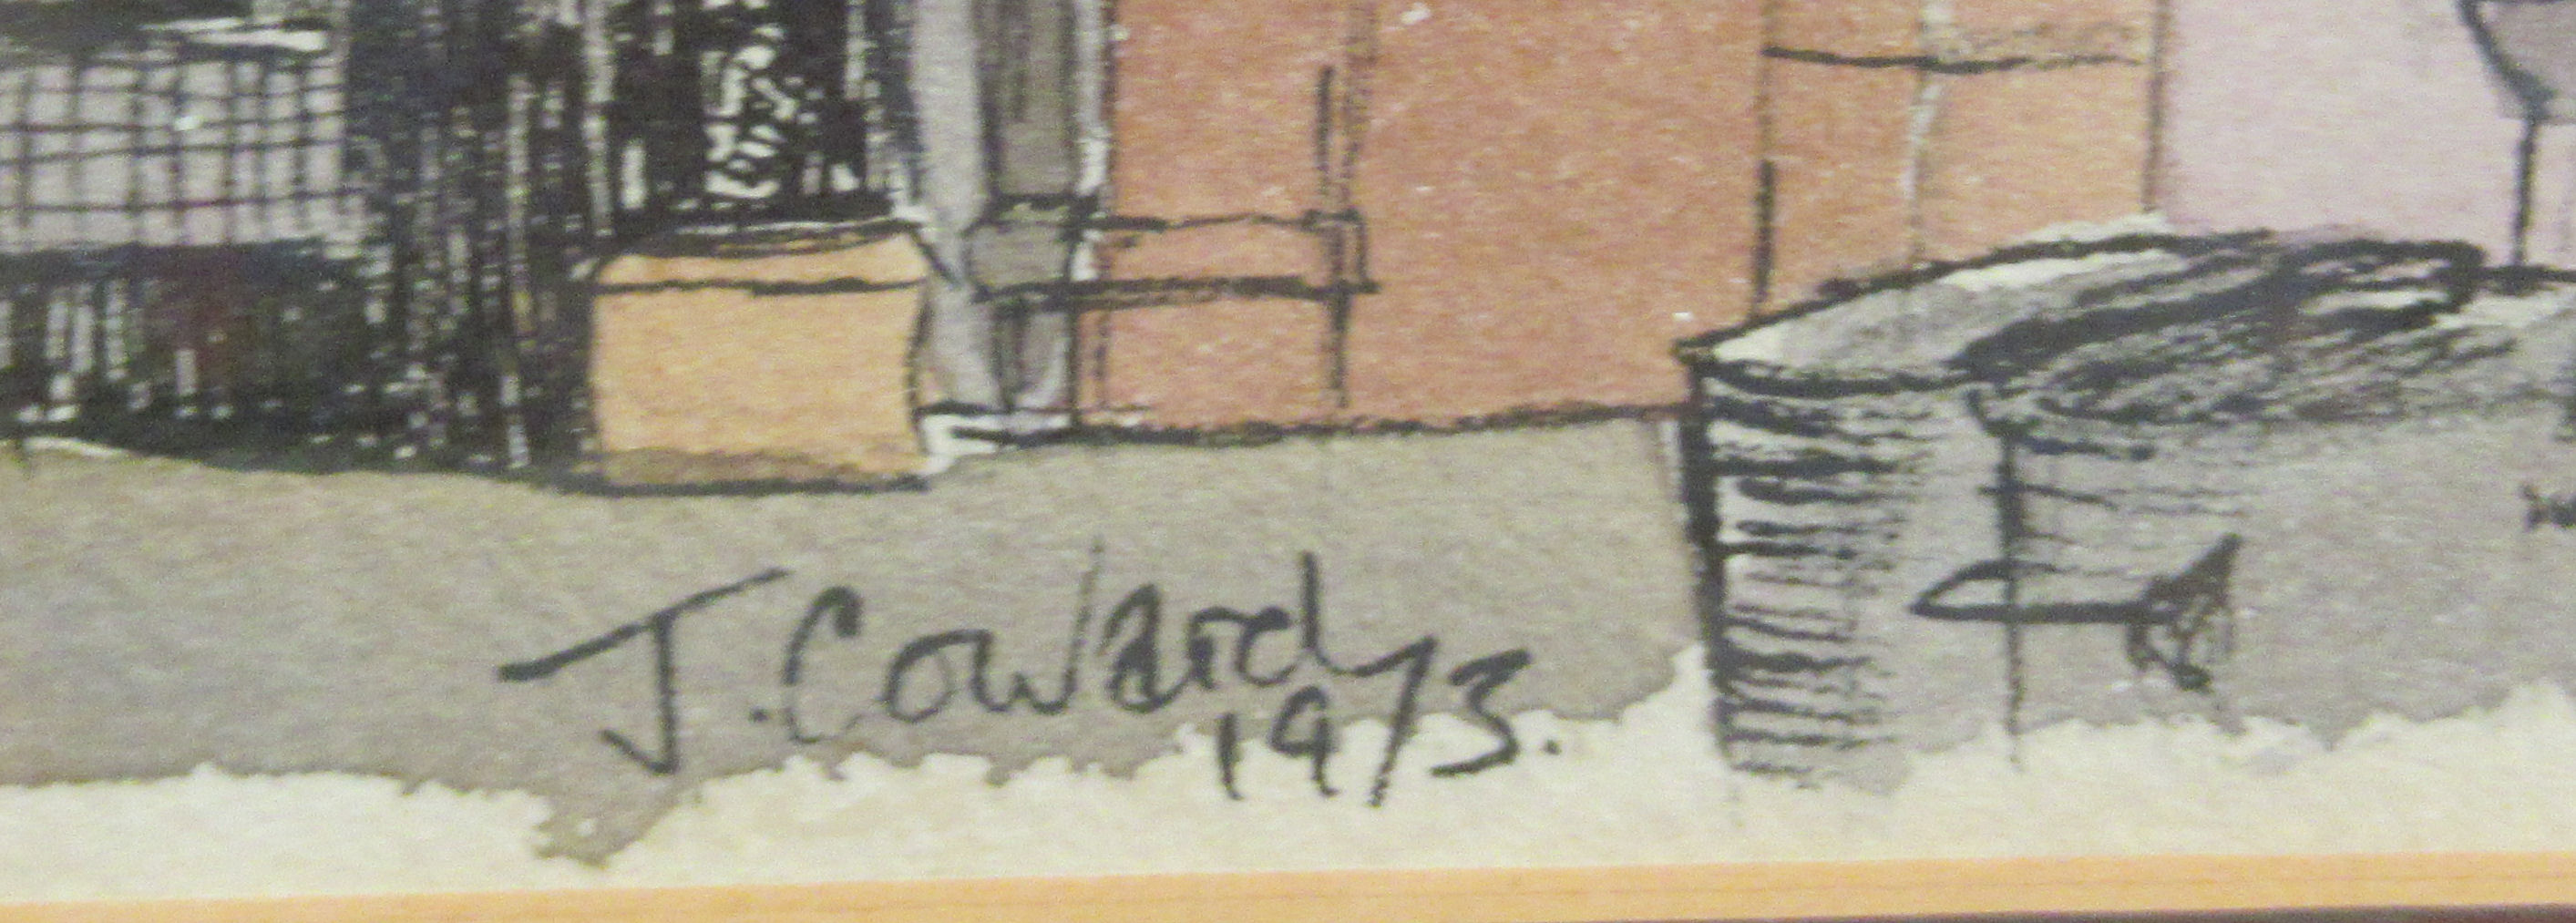 Three framed works by J Coward - London street scenes  mixed media  bearing signatures & titles - Image 7 of 7